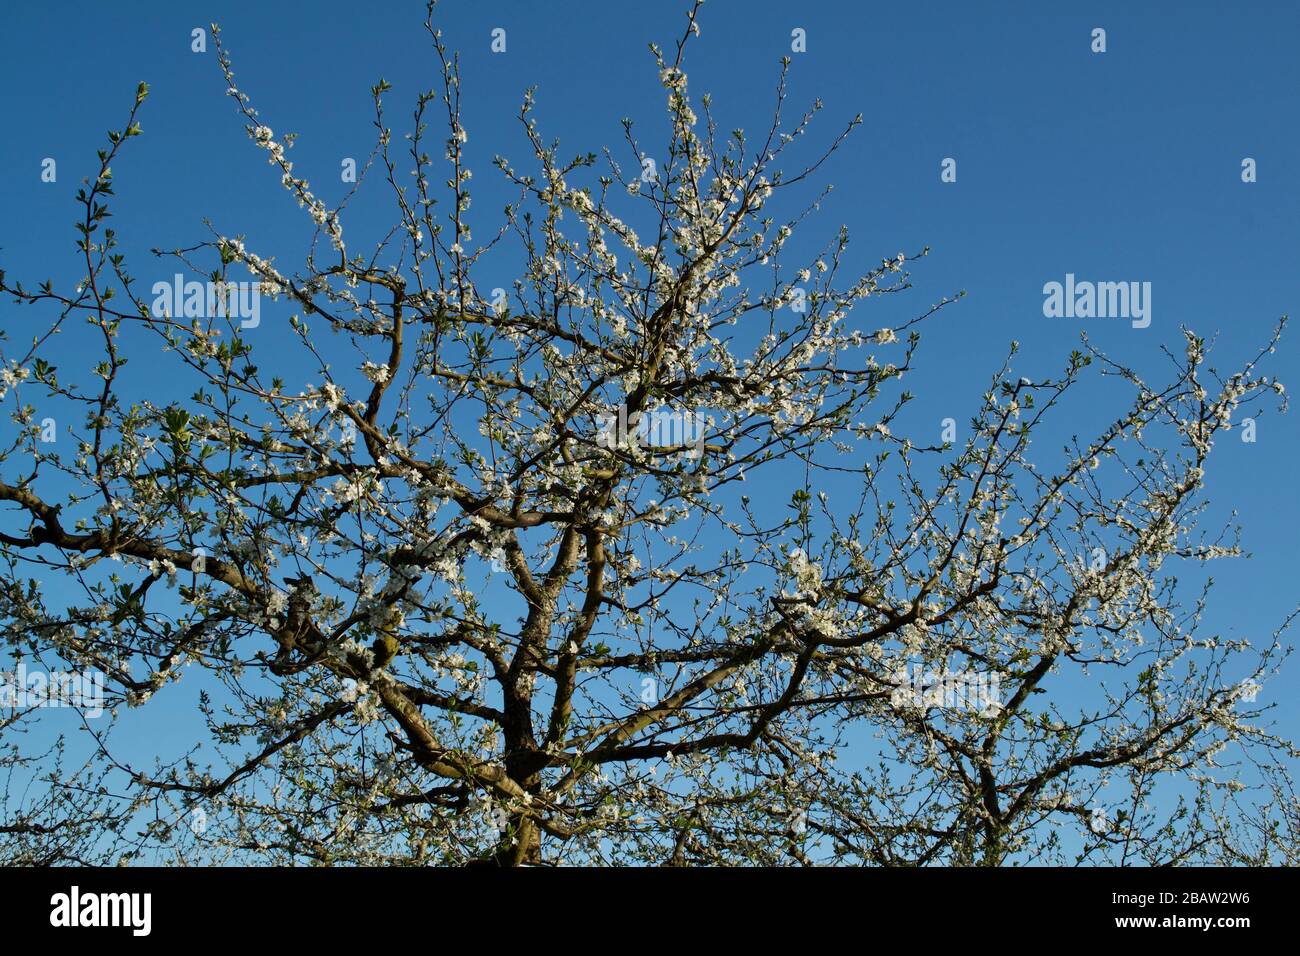 Spring blossom on prune / plum trees of the Prune D'Agen growing area in the Lot-et-Garonne, France. Stock Photo